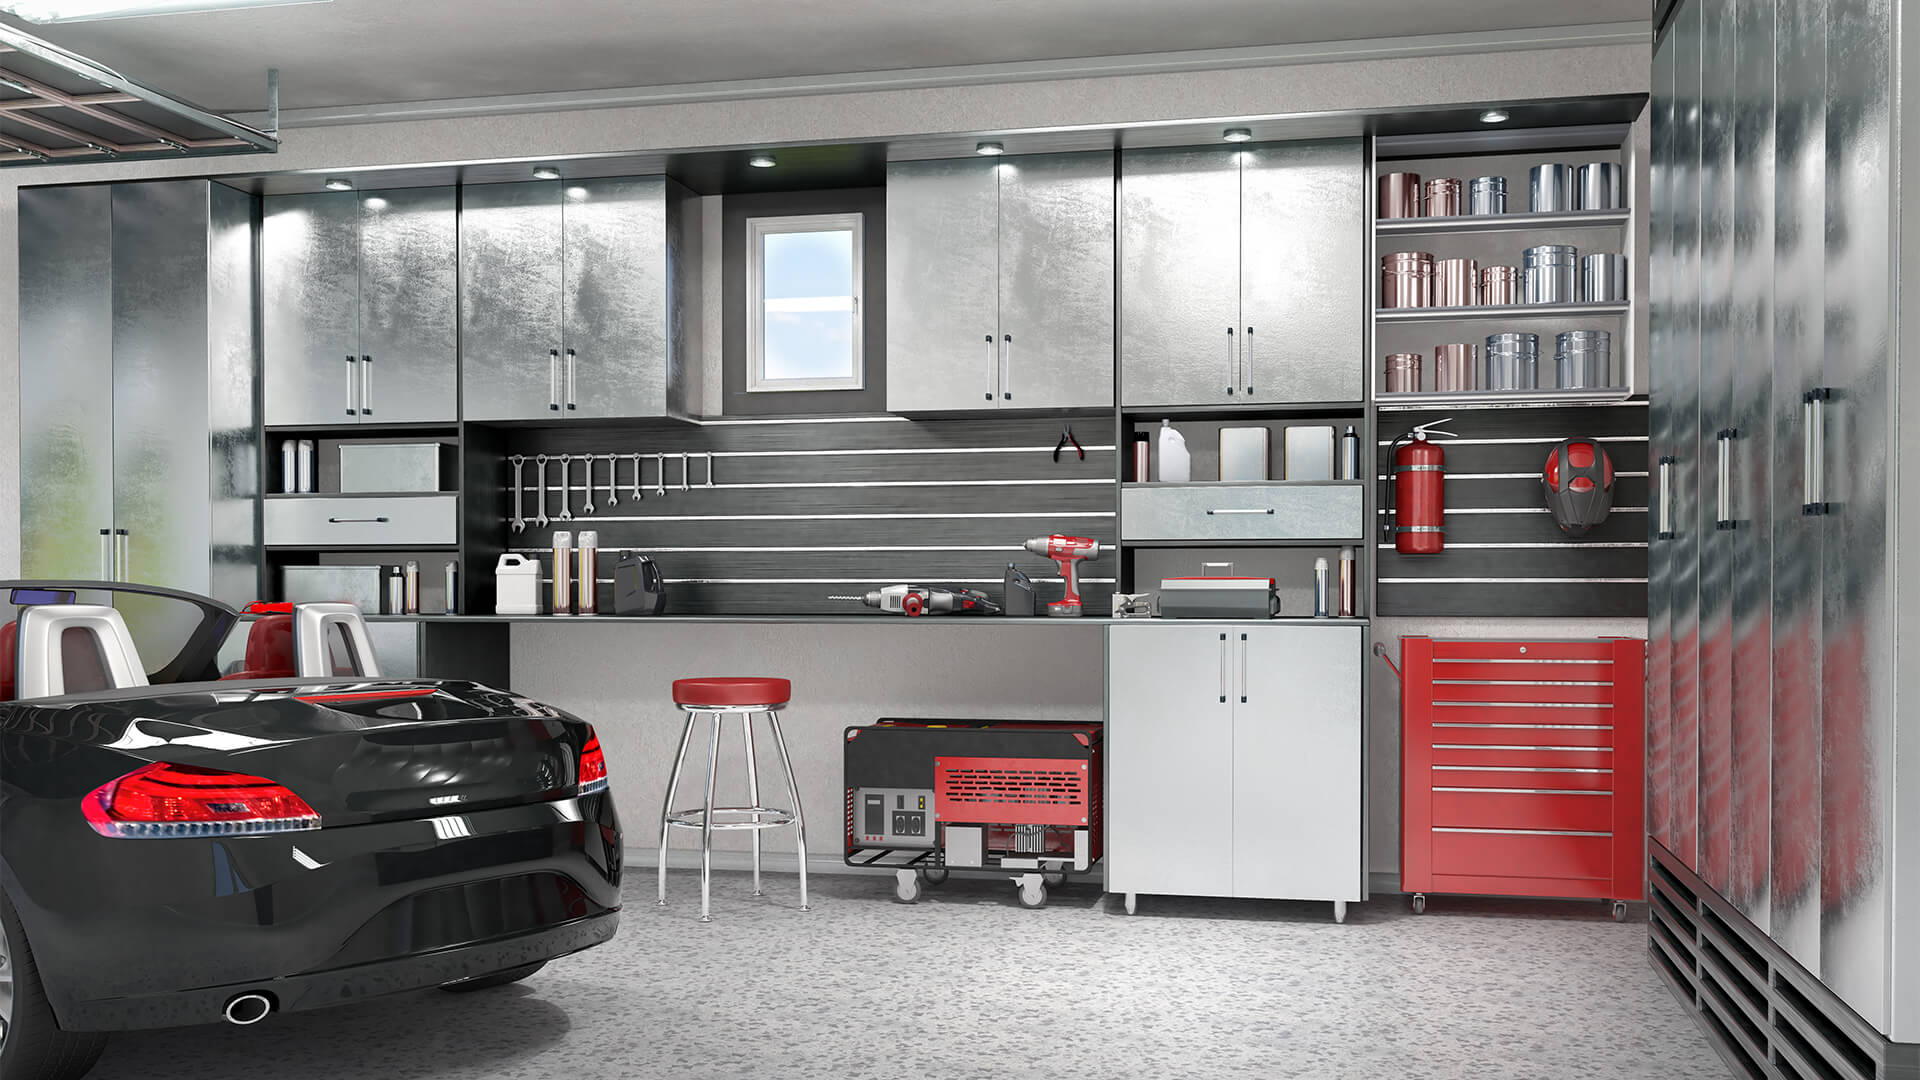 17 Tips to Make Your Garage Interior More Useful